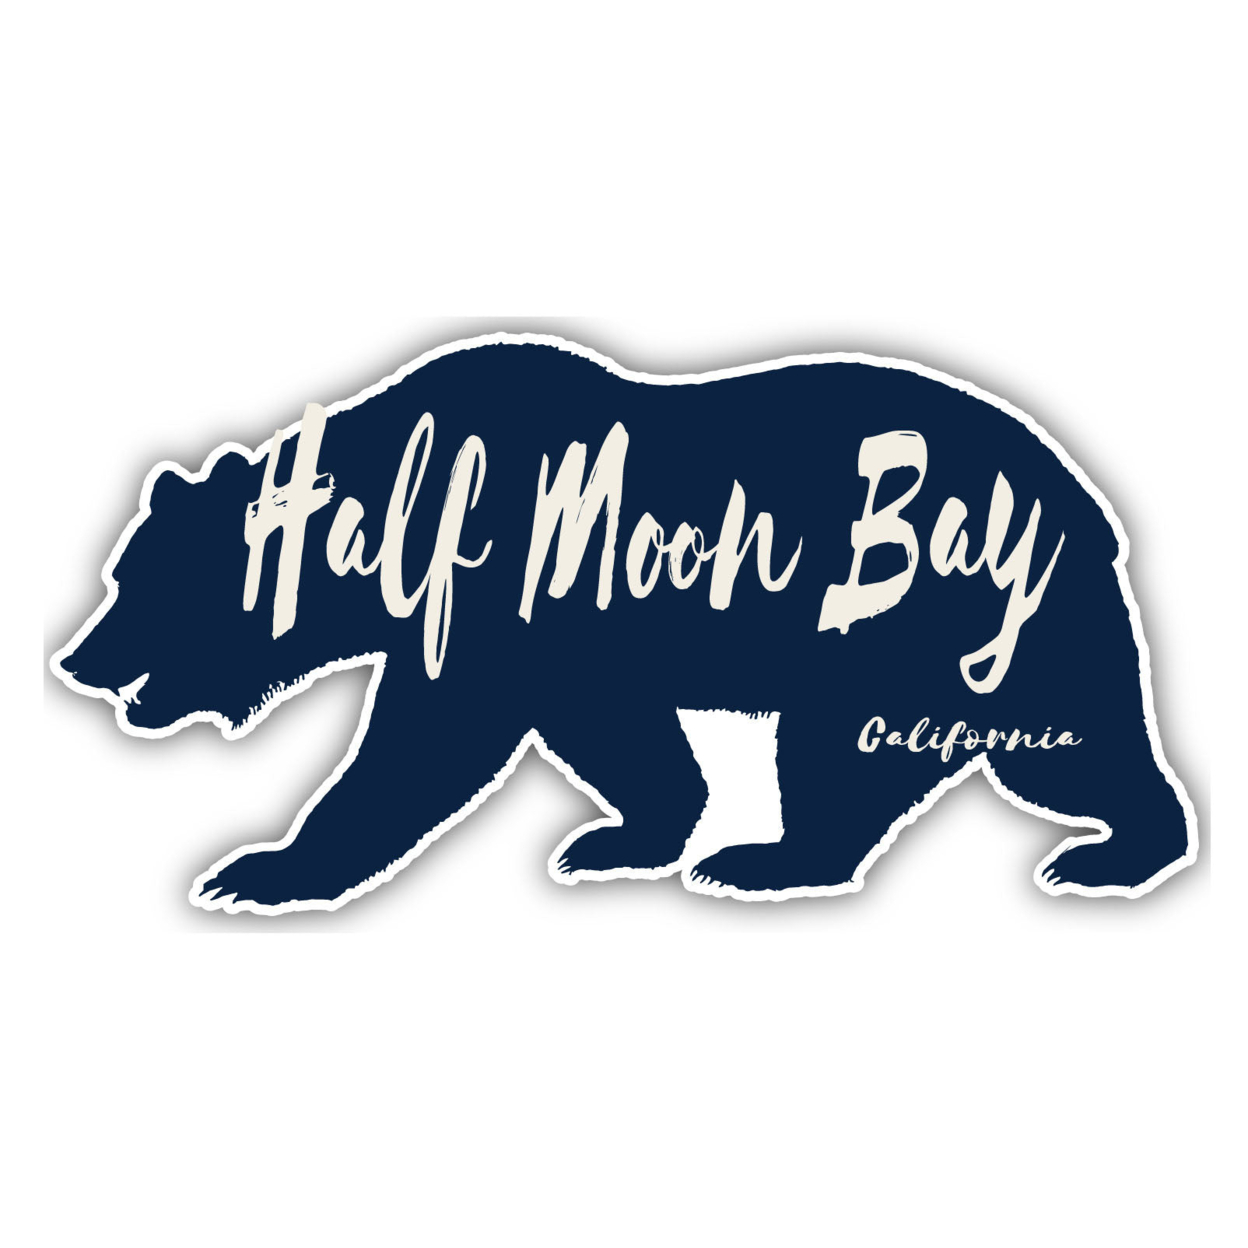 Half Moon Bay California Souvenir Decorative Stickers (Choose Theme And Size) - 4-Pack, 8-Inch, Camp Life